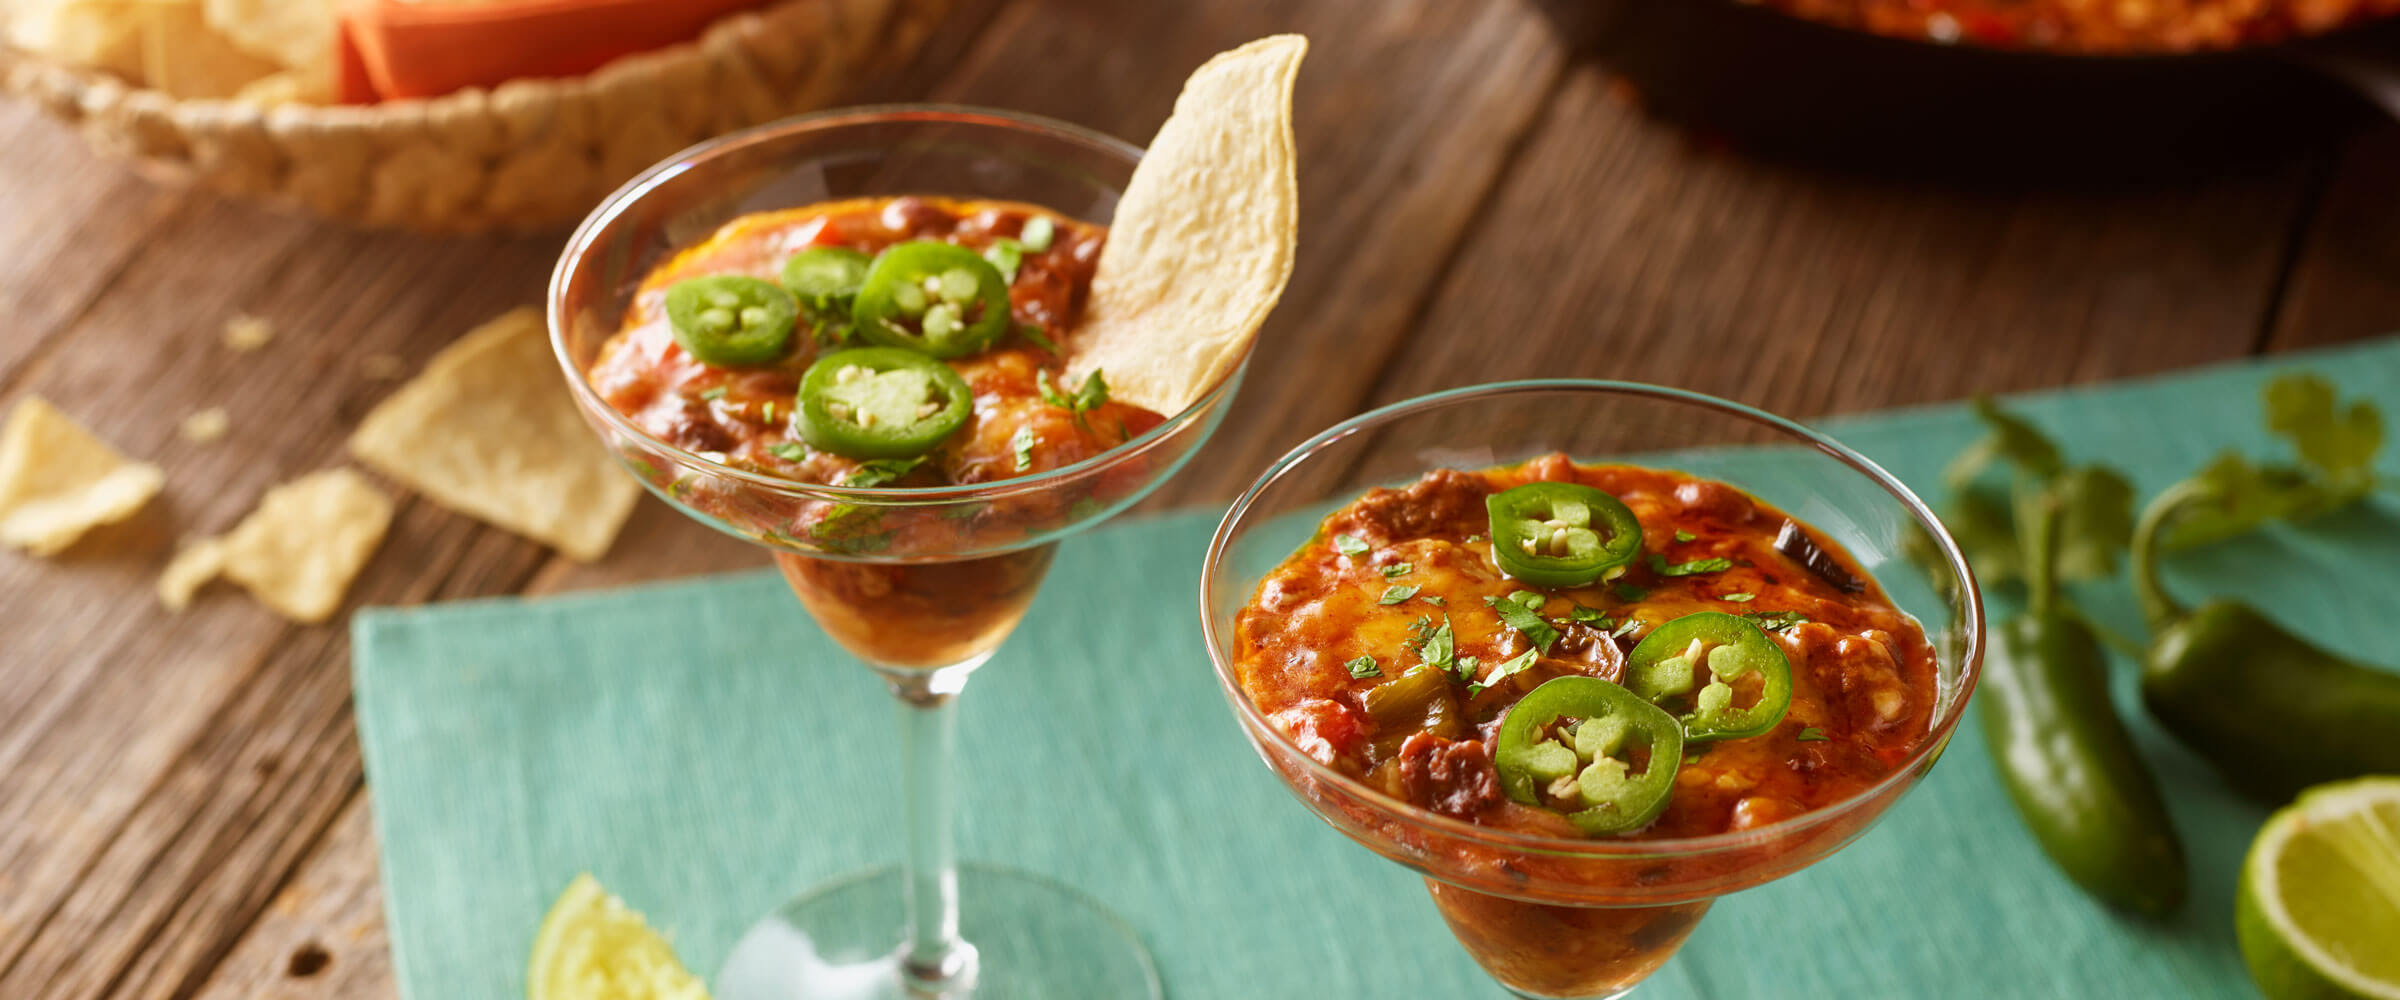 Queso Fundido Con Chili a la Tequila in martini glasses topped with jalapeno and chips on the side